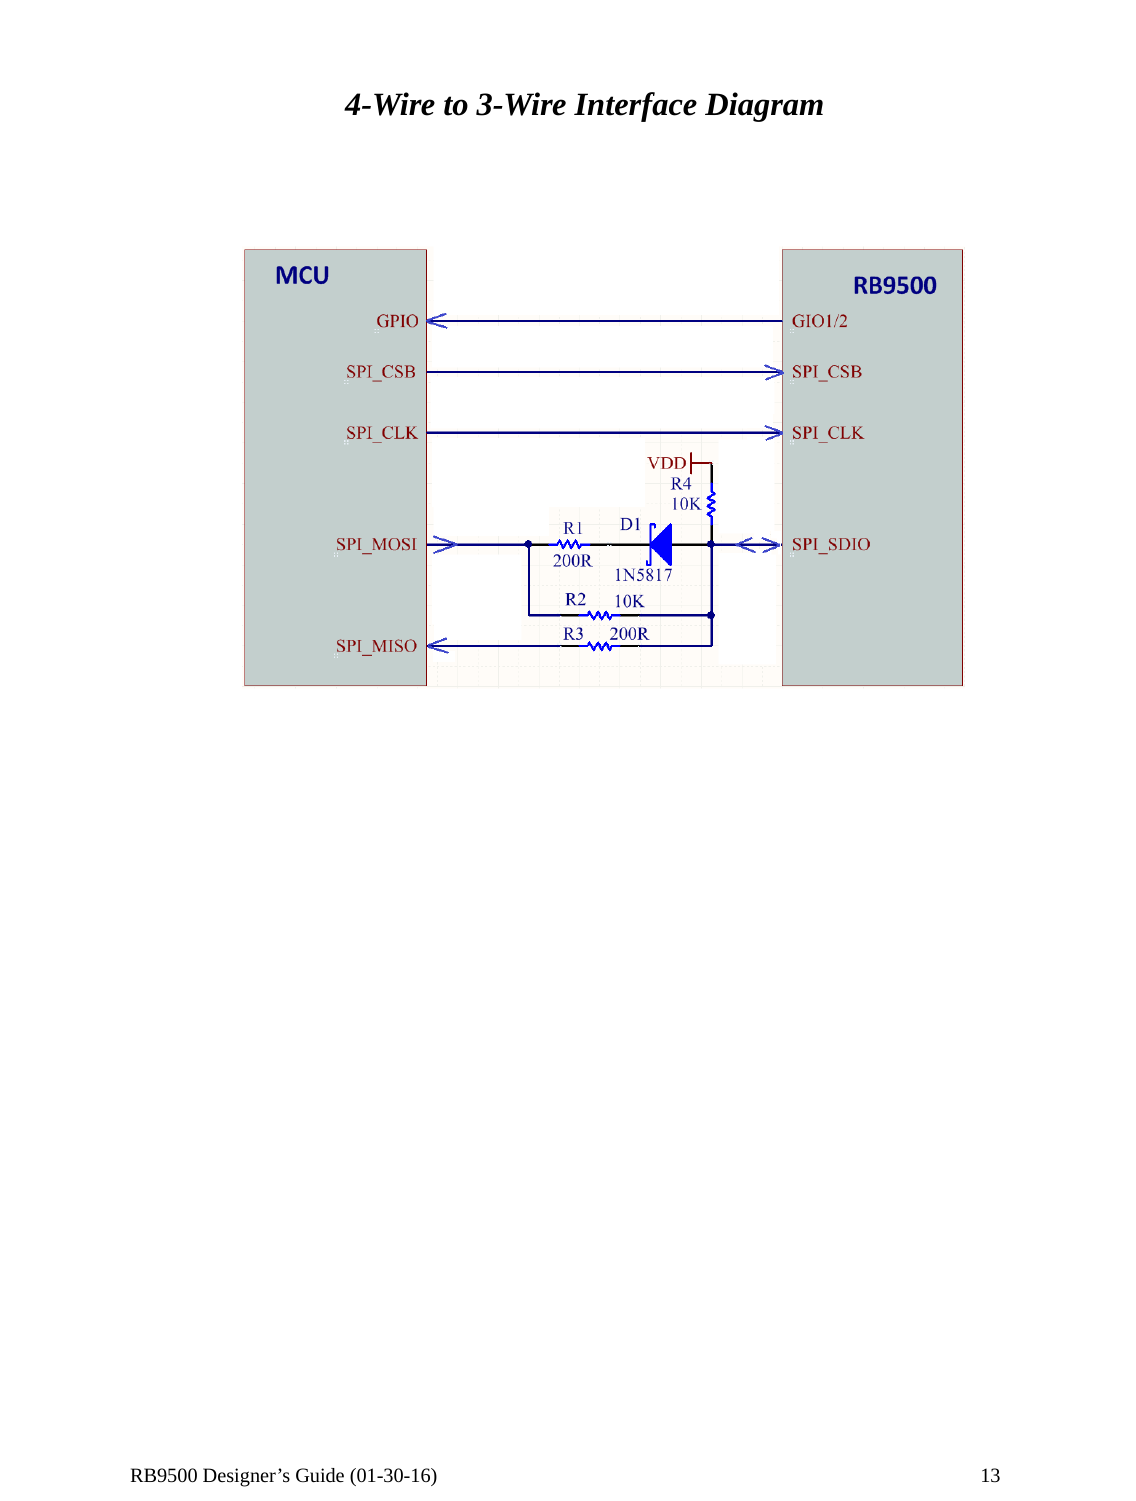  RB9500 Designer’s Guide (01-30-16)               13  4-Wire to 3-Wire Interface Diagram            